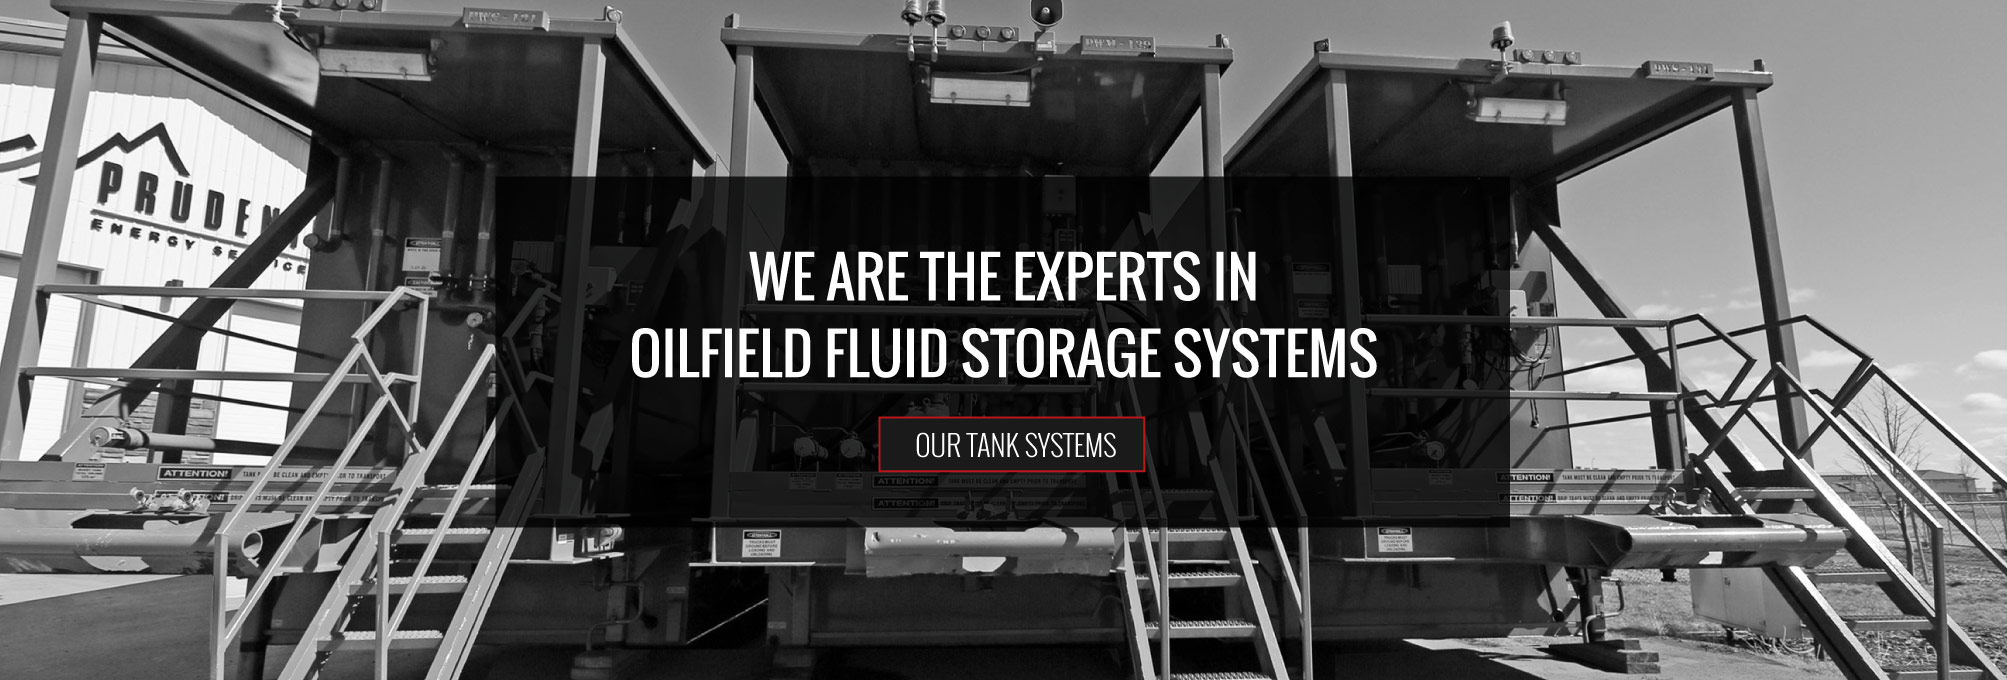 We are the Experts in Oilfield Fluid Storage